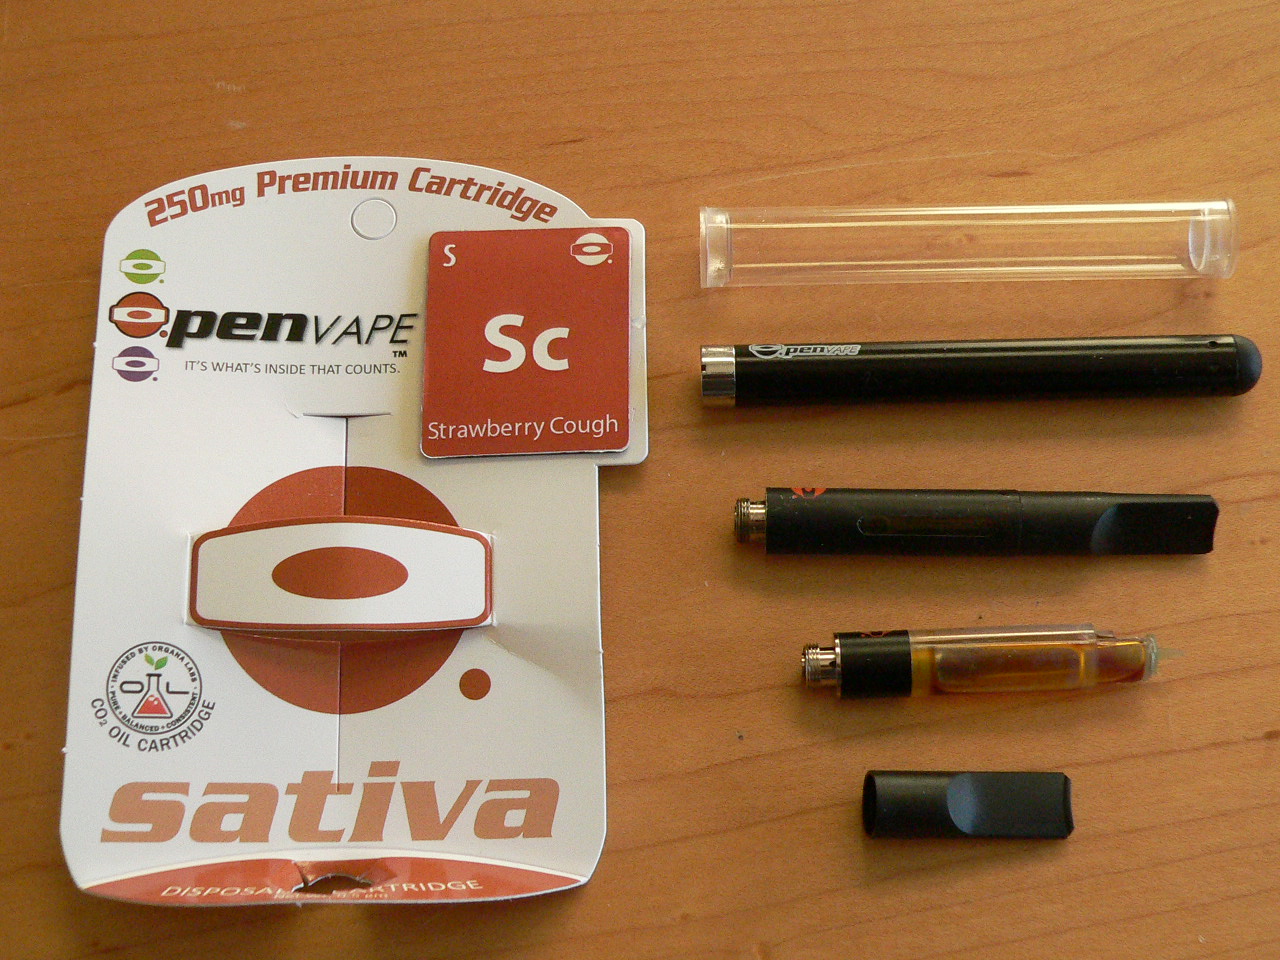 The O.Pen personal vaporizer and a Strawberry Cough vape cartridge.